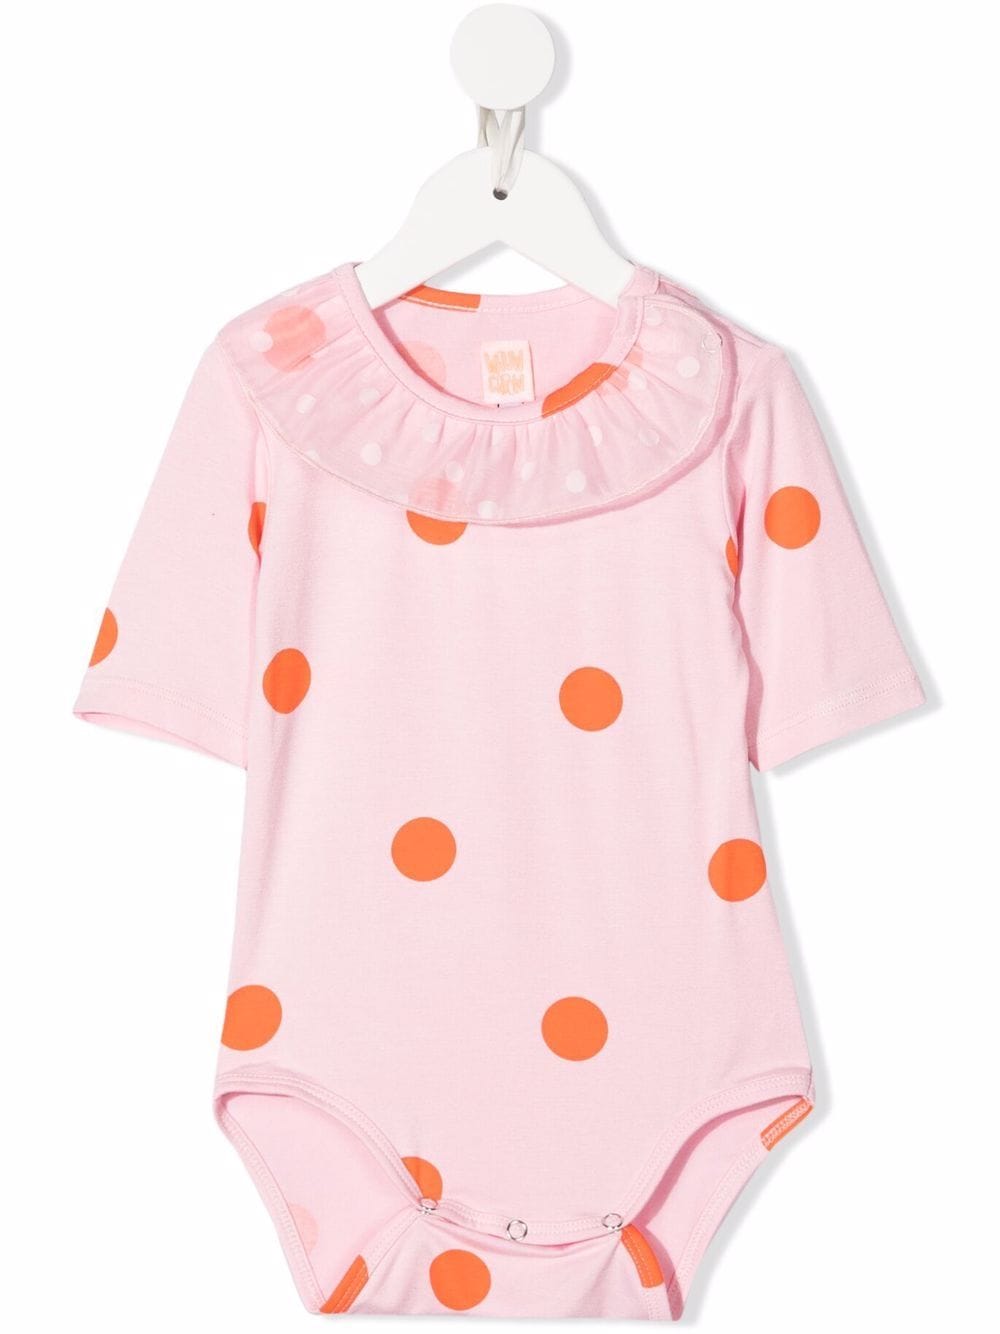 WAUW CAPOW by BANGBANG Sweety polka dot romper - Pink von WAUW CAPOW by BANGBANG